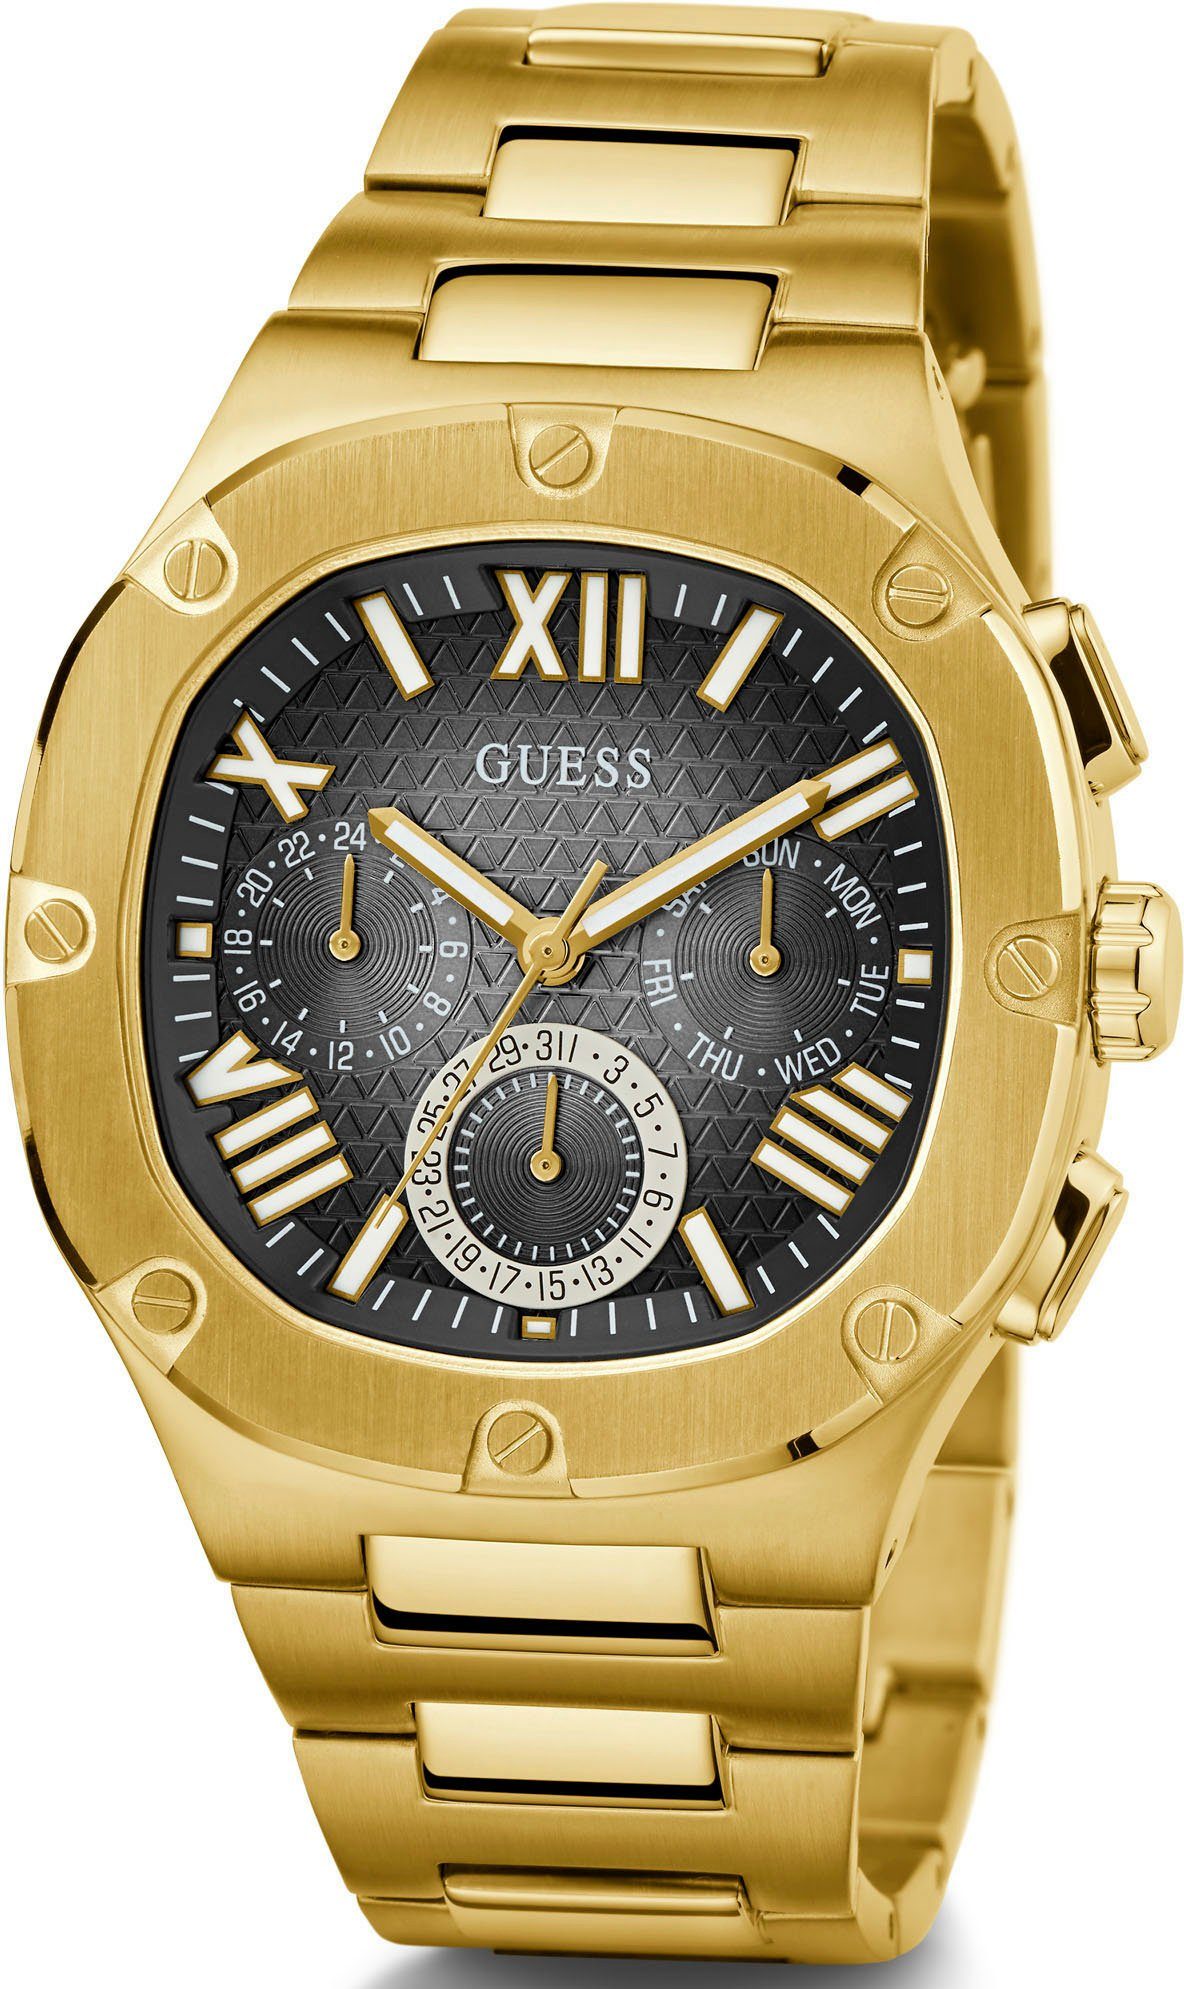 Multifunktionsuhr Guess GW0572G2